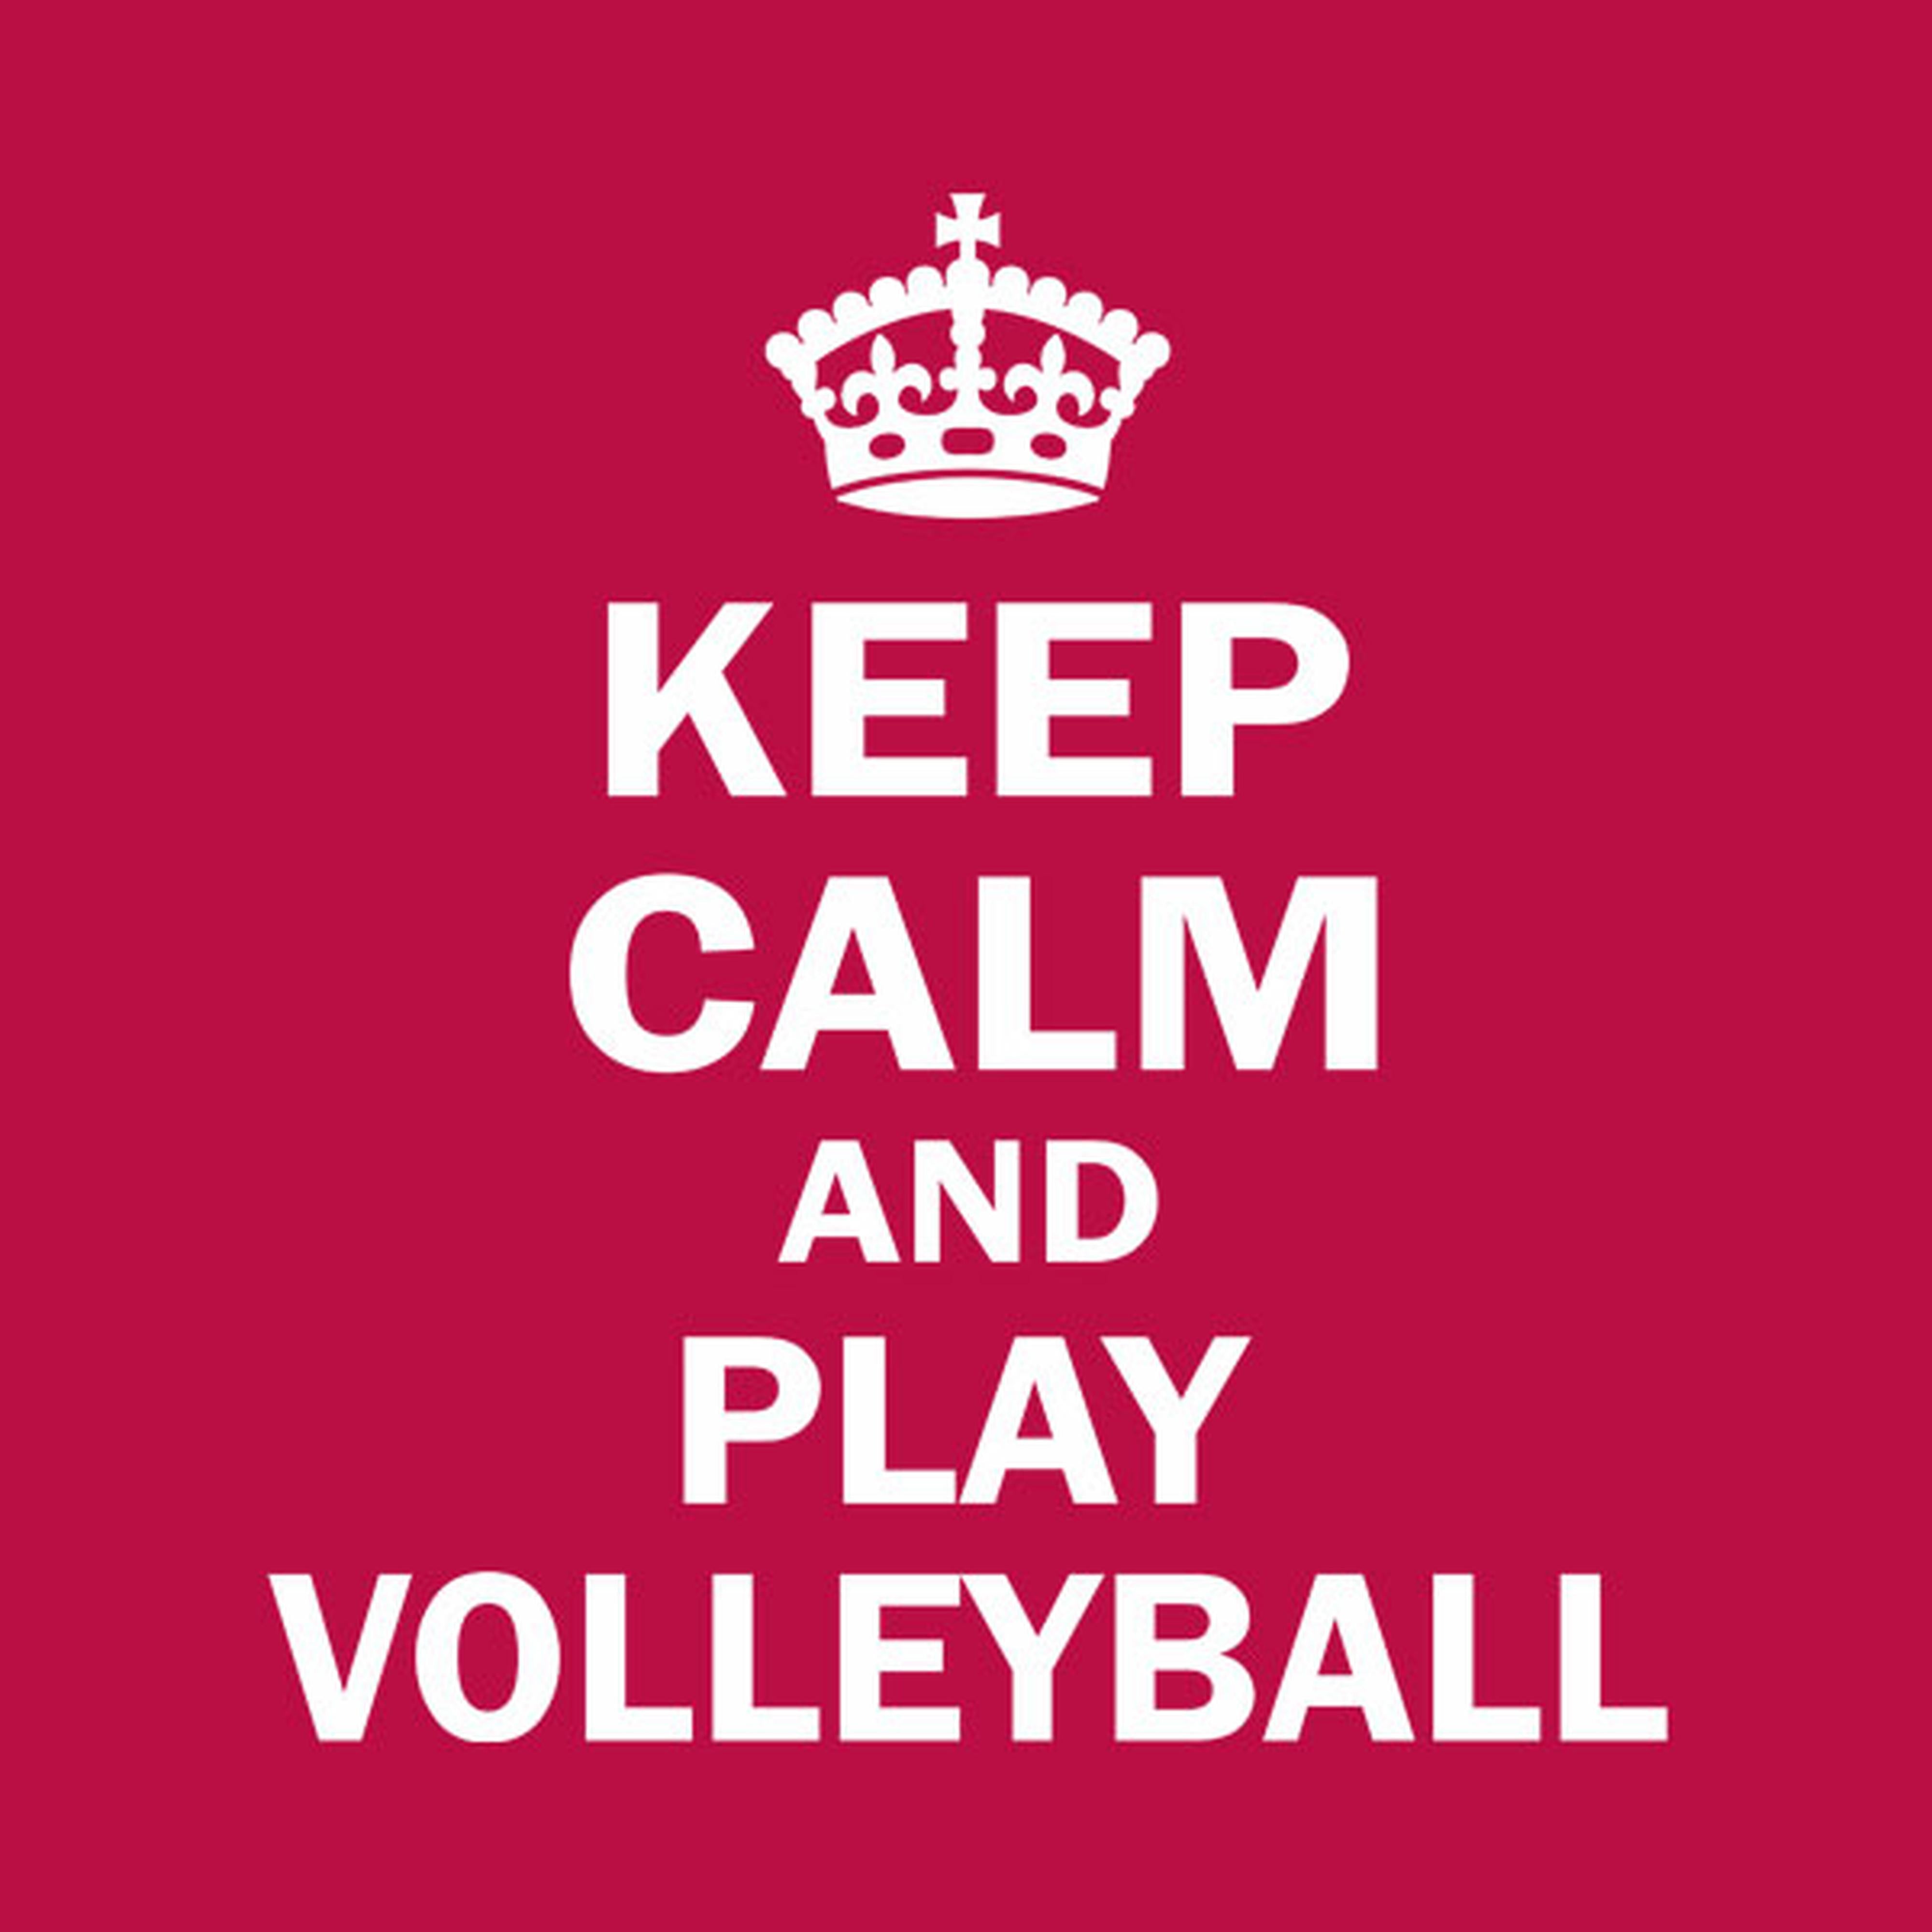 Keep calm and play volleyball - T-shirt